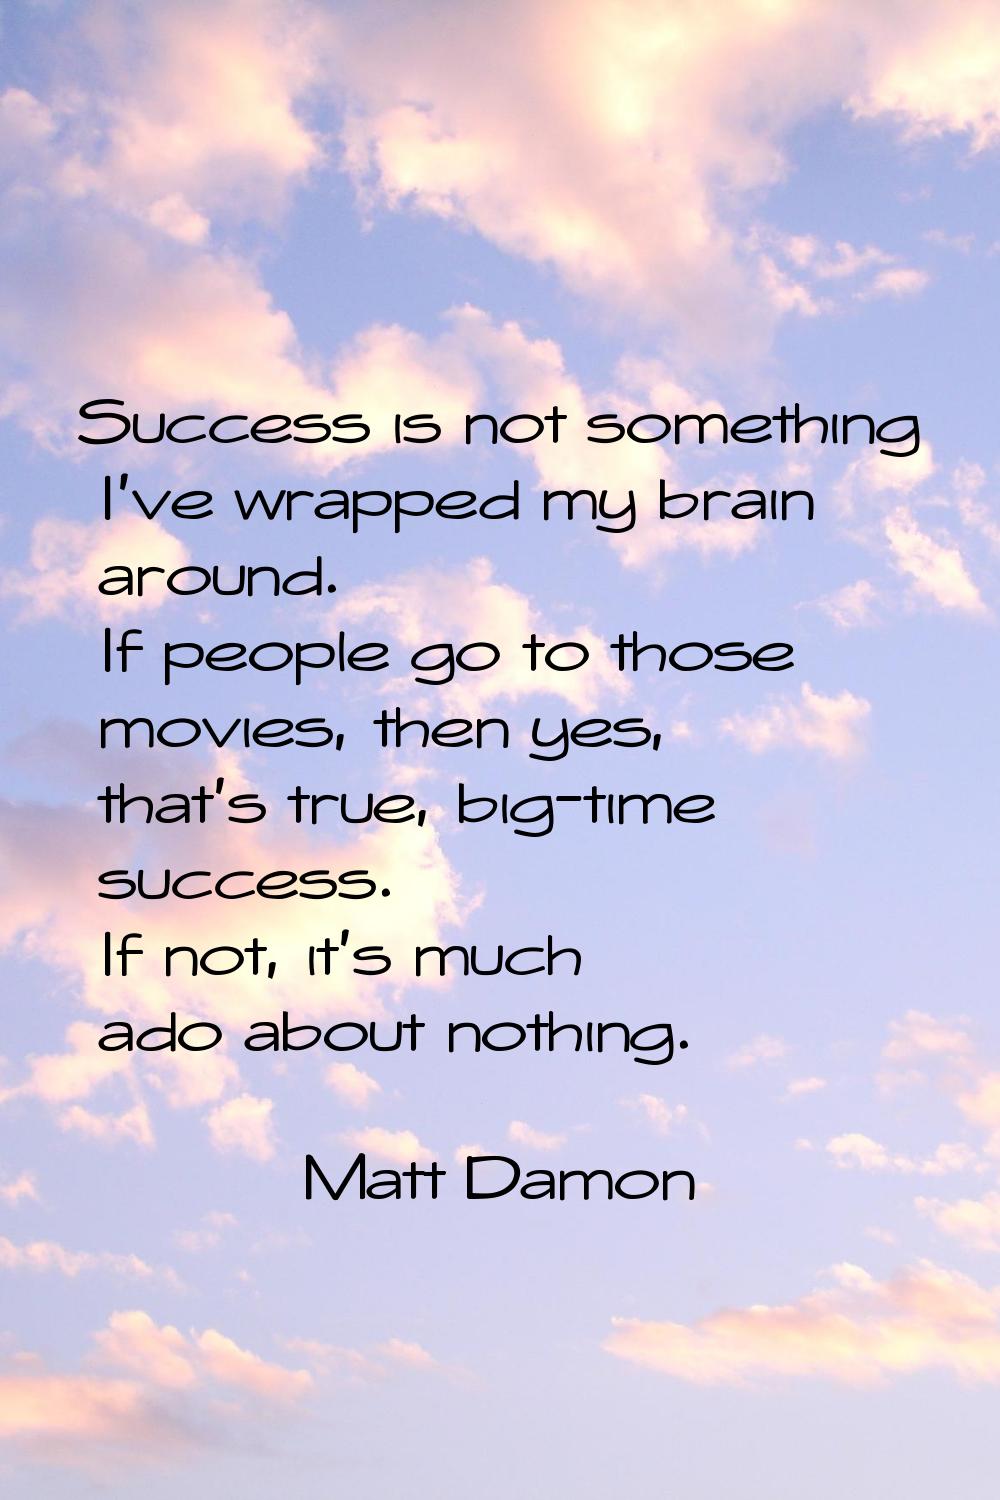 Success is not something I've wrapped my brain around. If people go to those movies, then yes, that